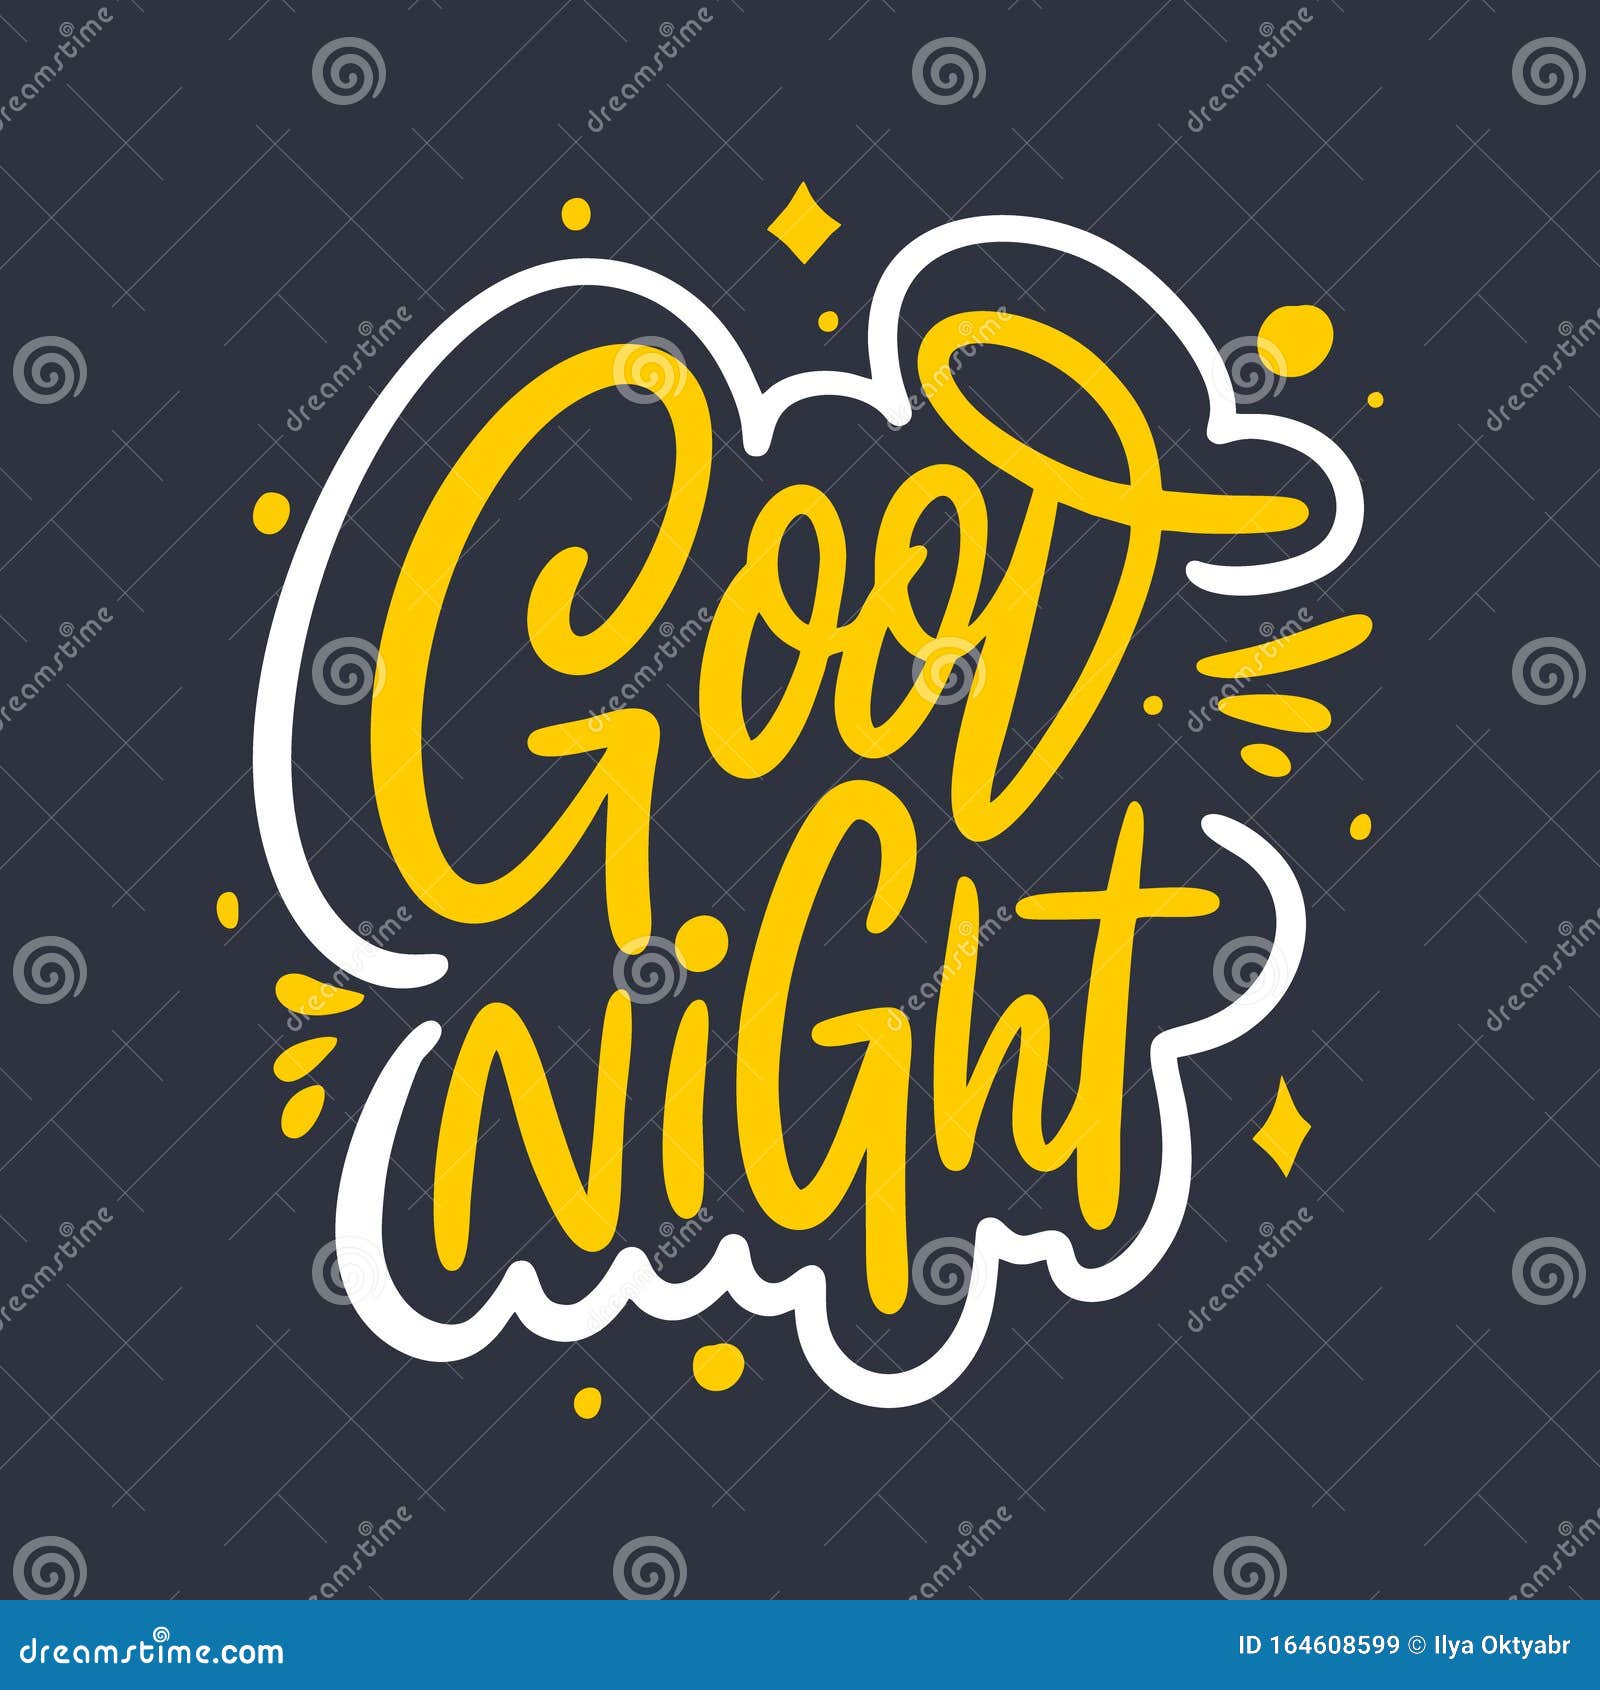 Good Night Hand Drawn Vector Lettering Phrase Isolated On Black